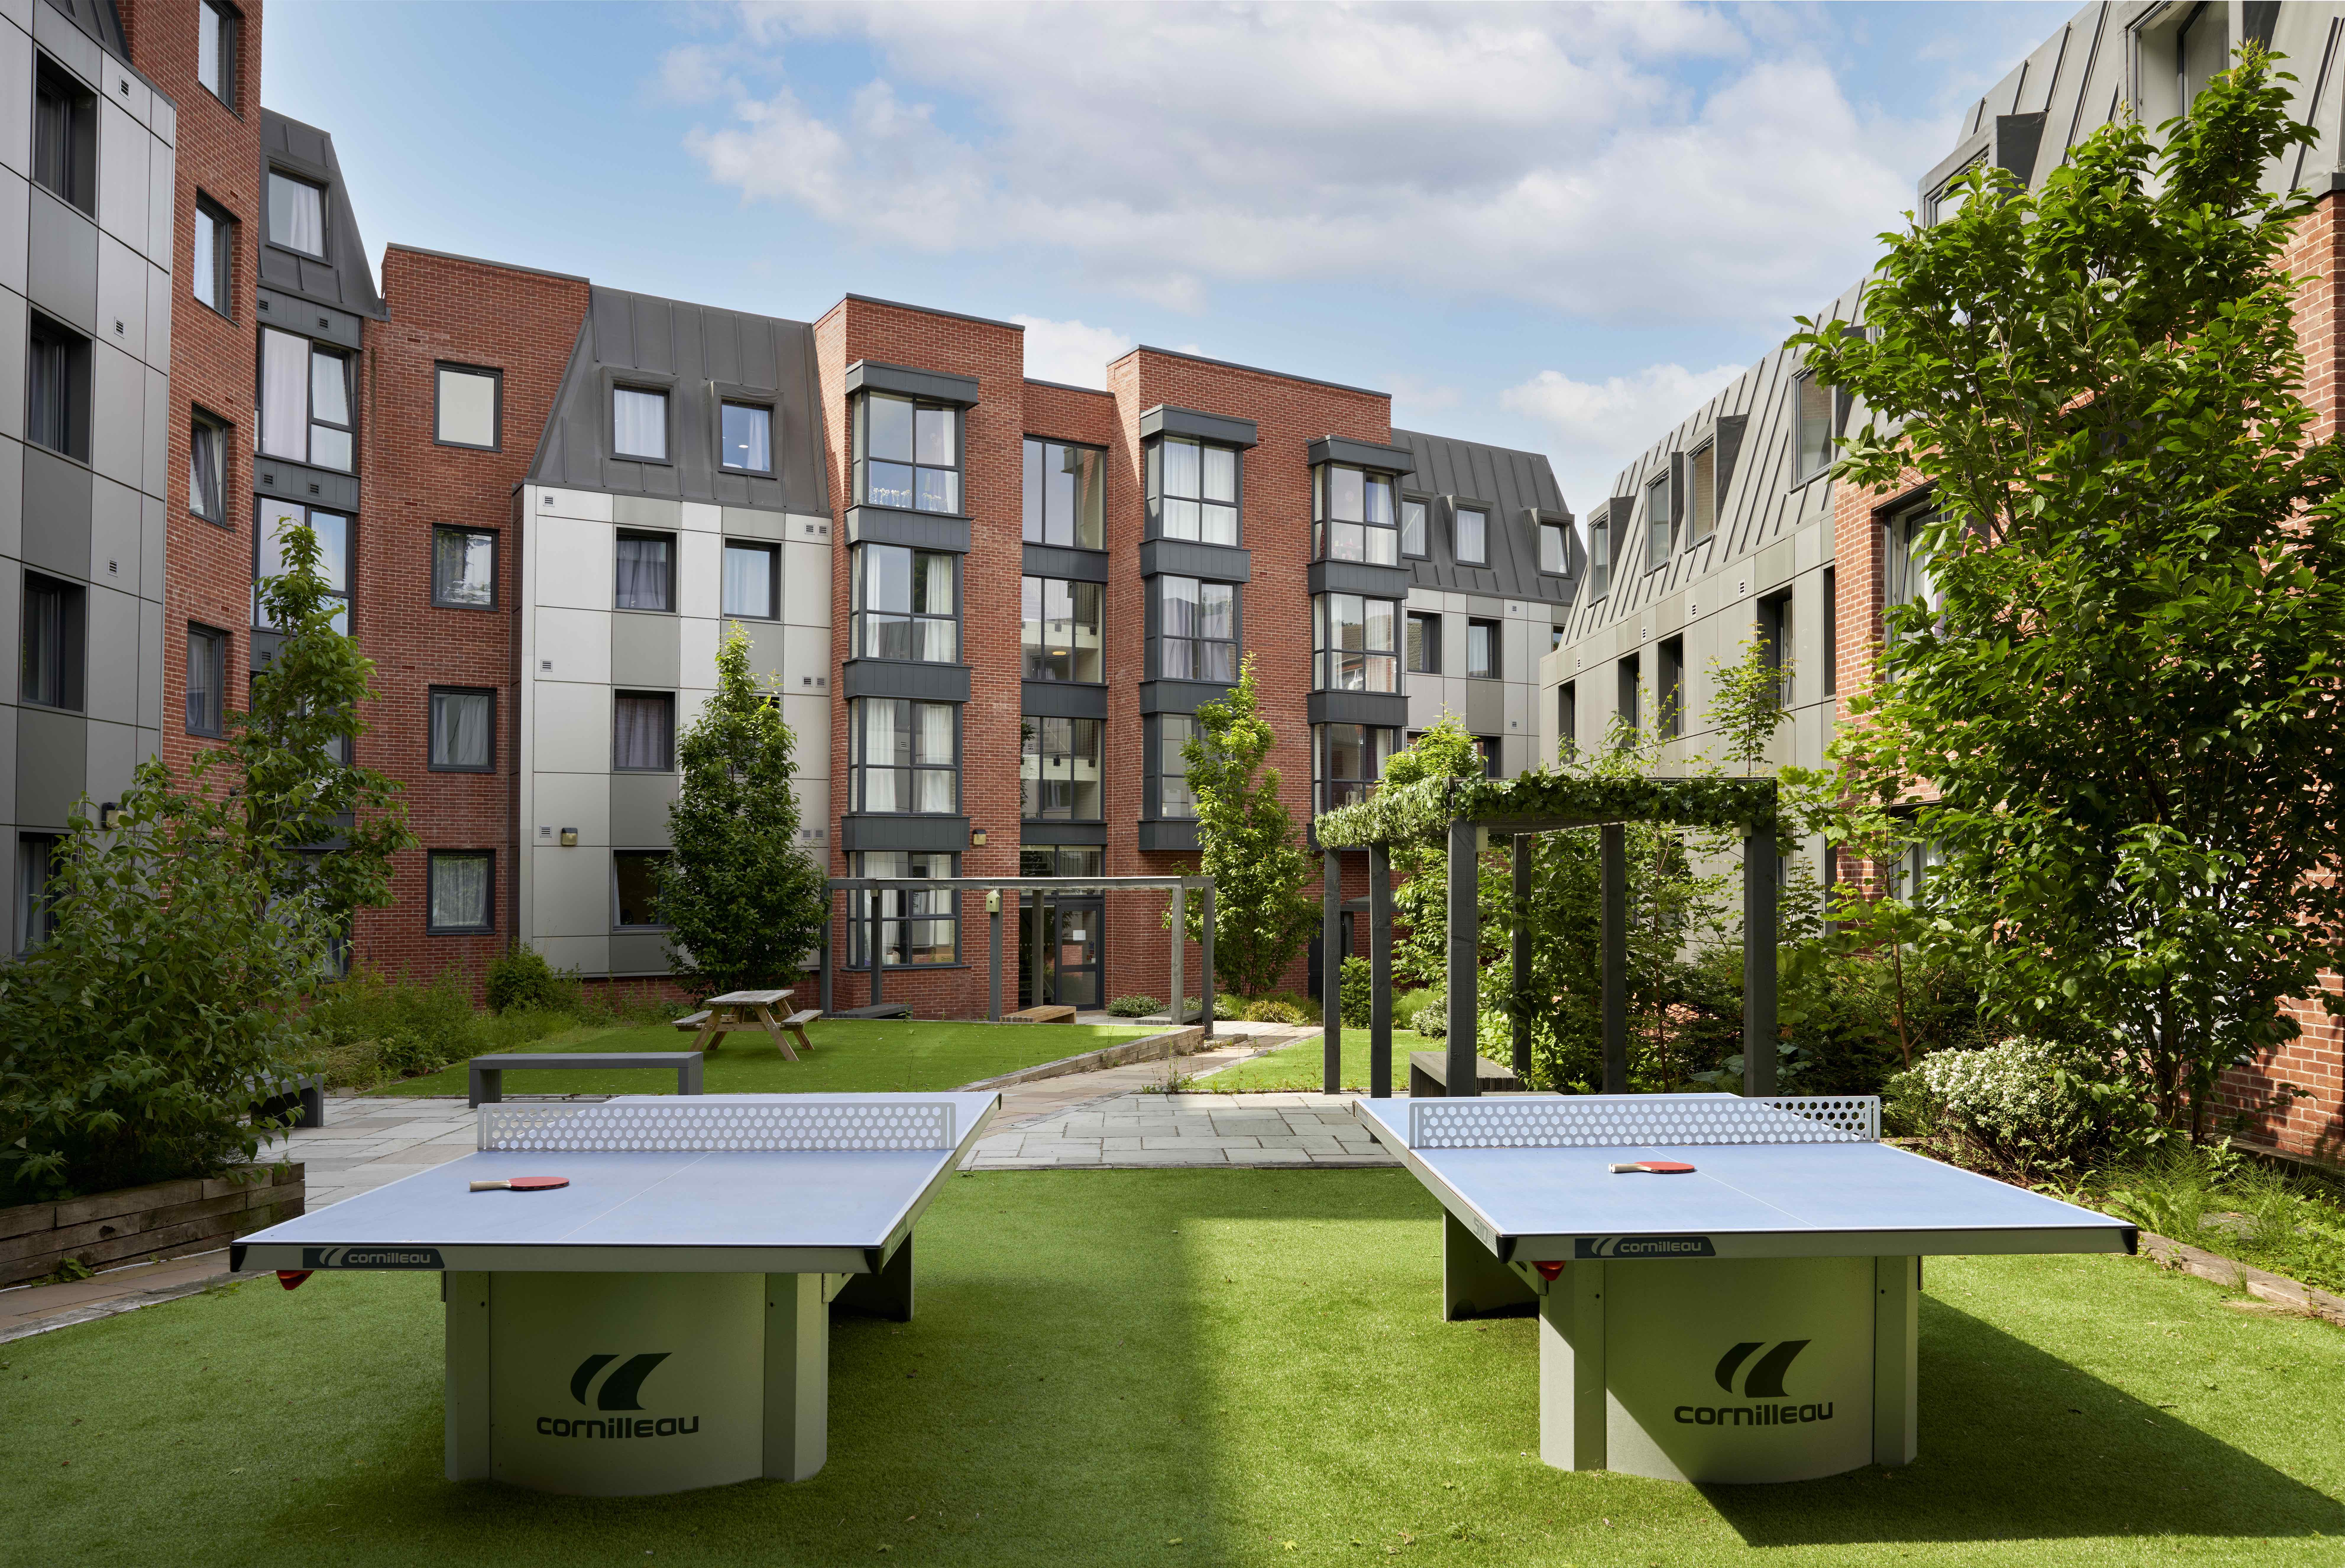 Leeds student accommodation outdoor games area